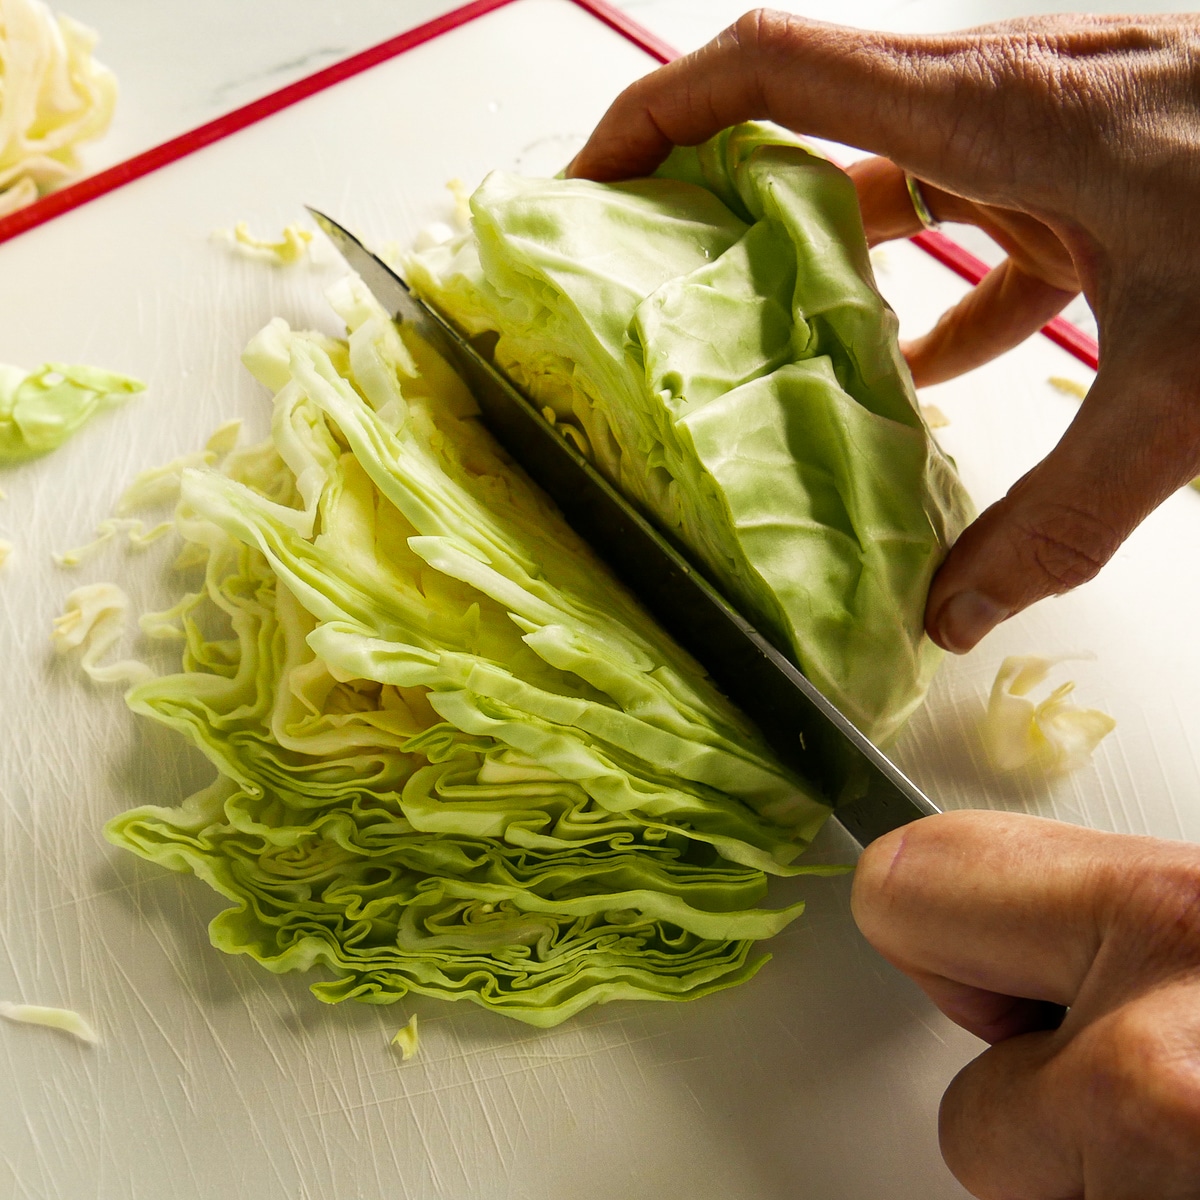 Cabbage being sliced by hand on a white cutting board.